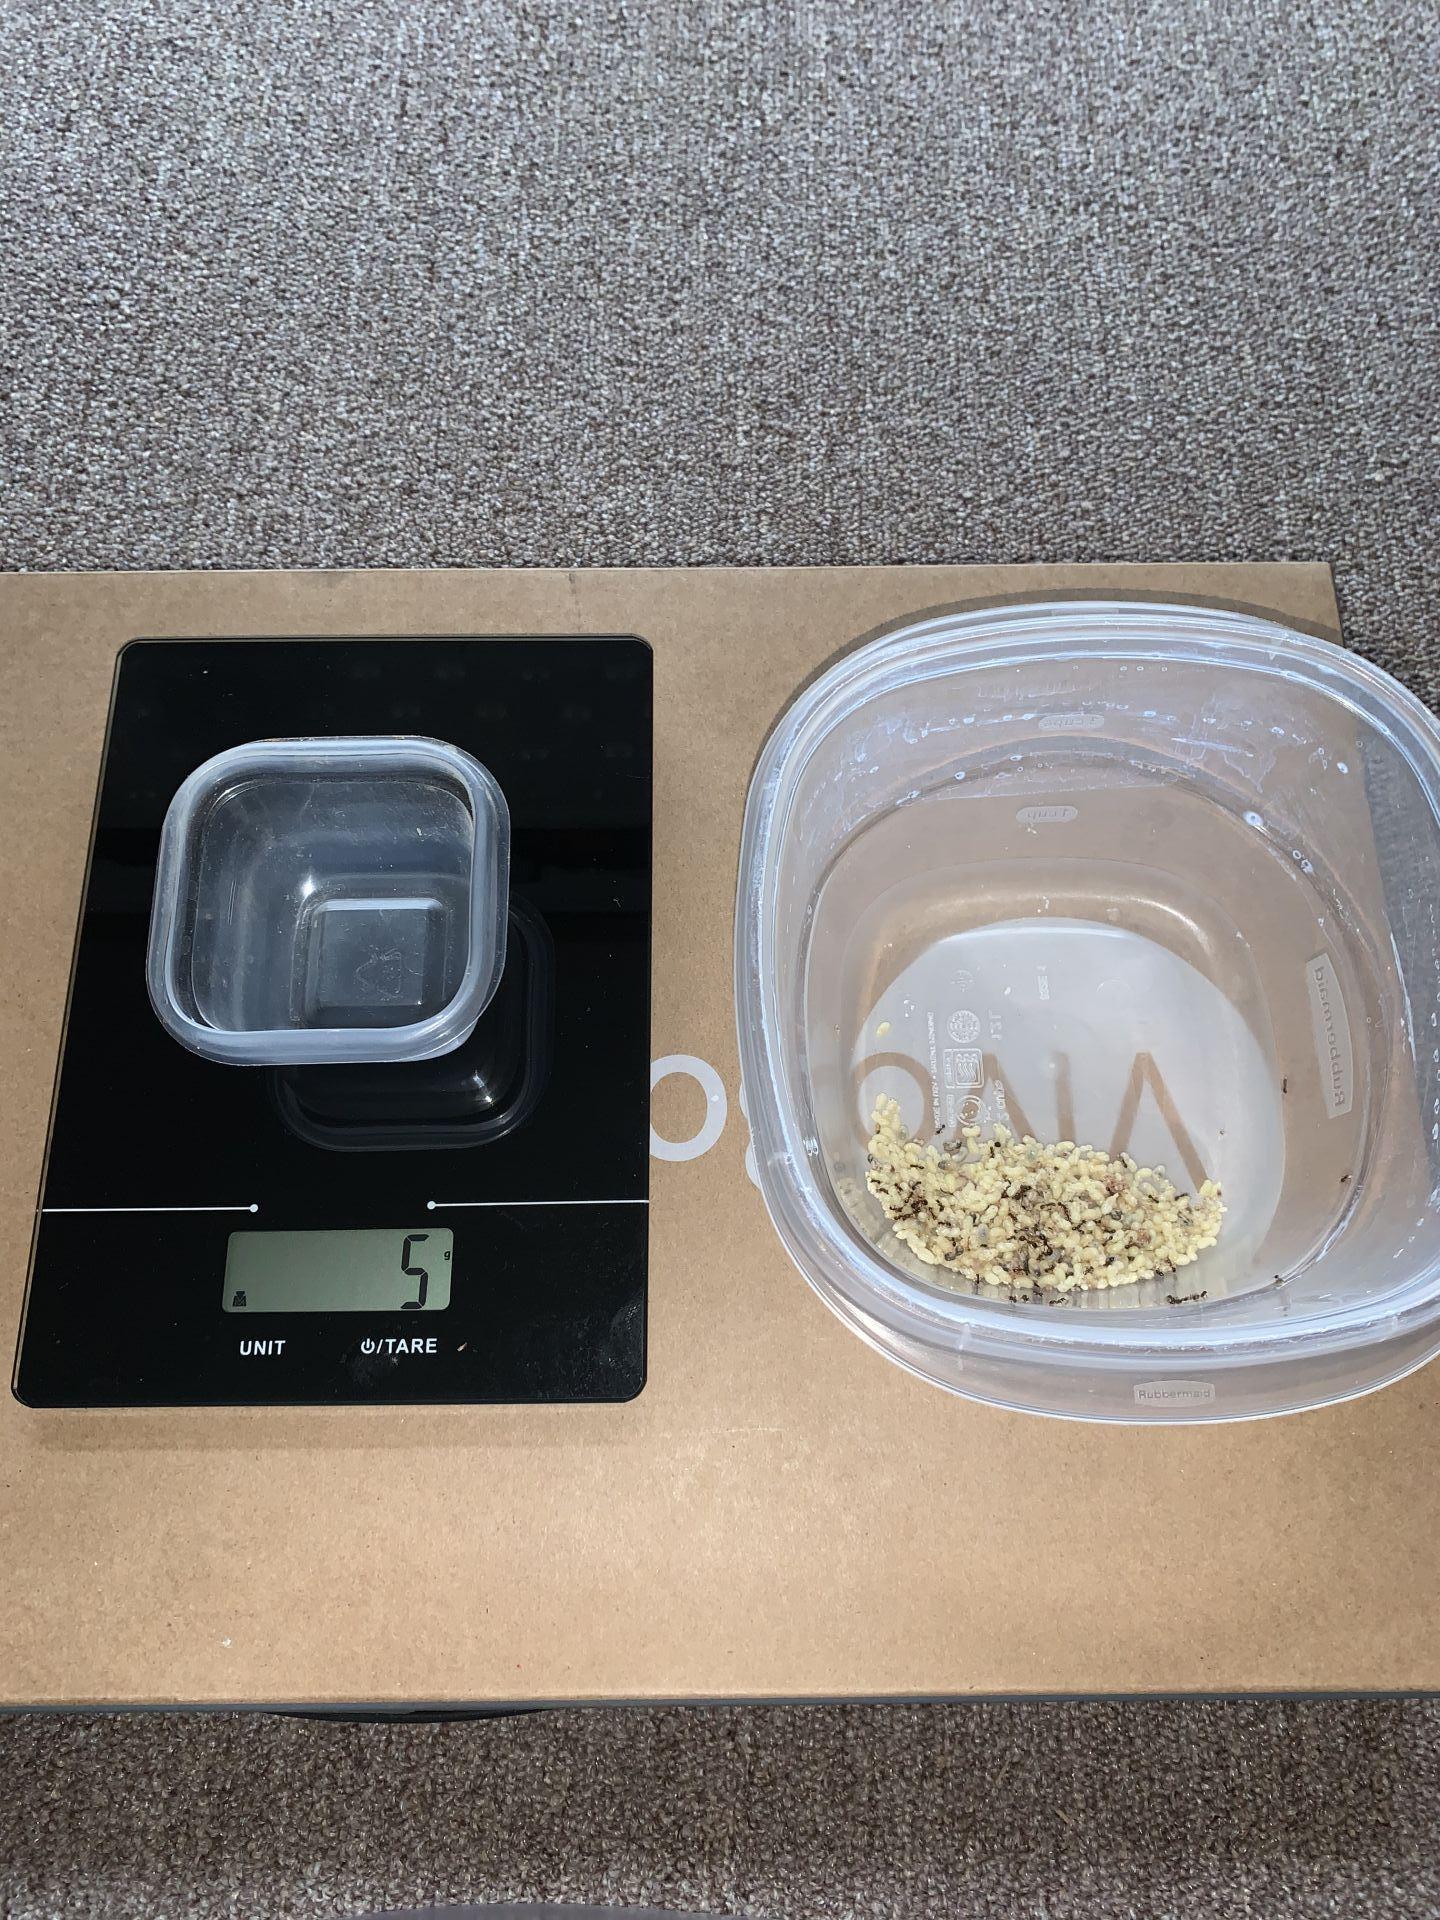 Weigh cup and food-brood with reduction of ants